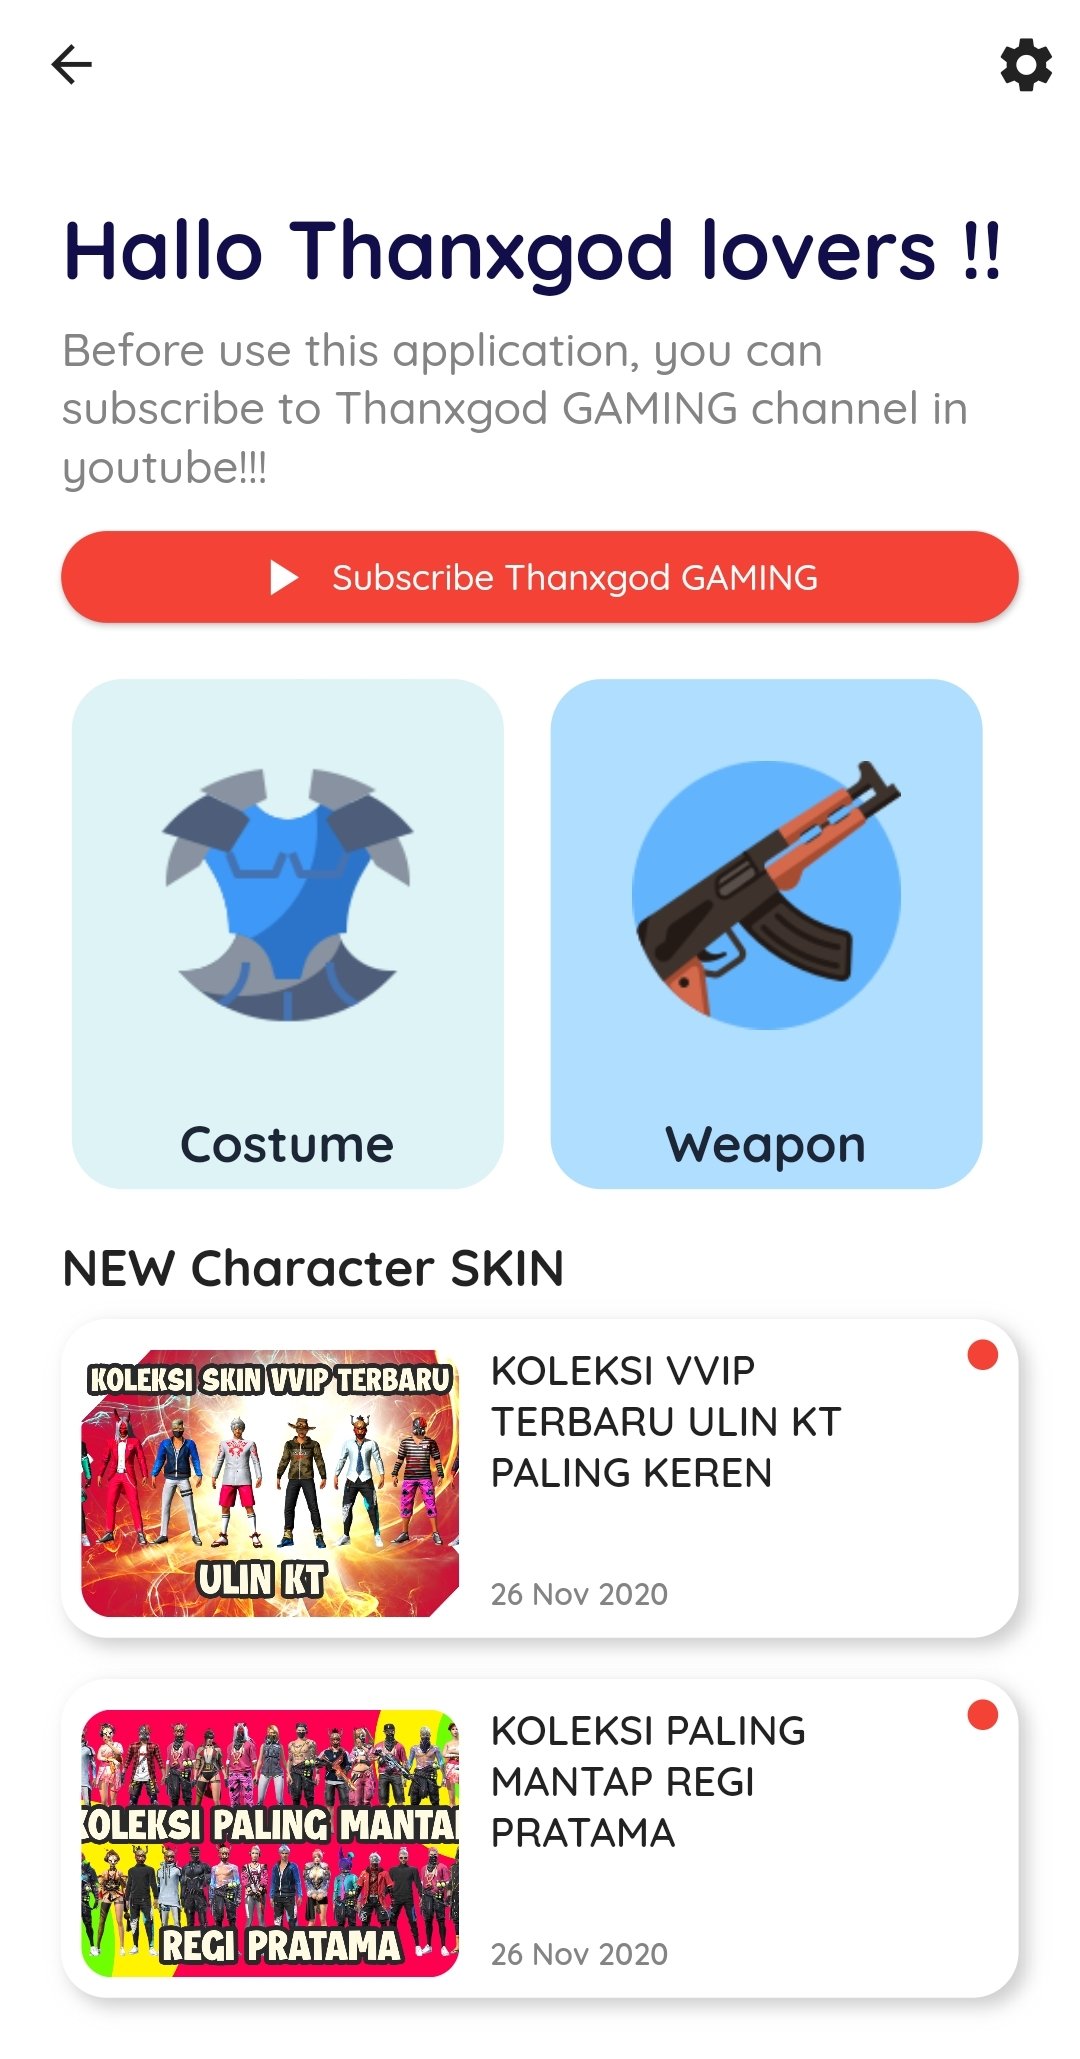 Skins from Story Mode free APK for Android Download